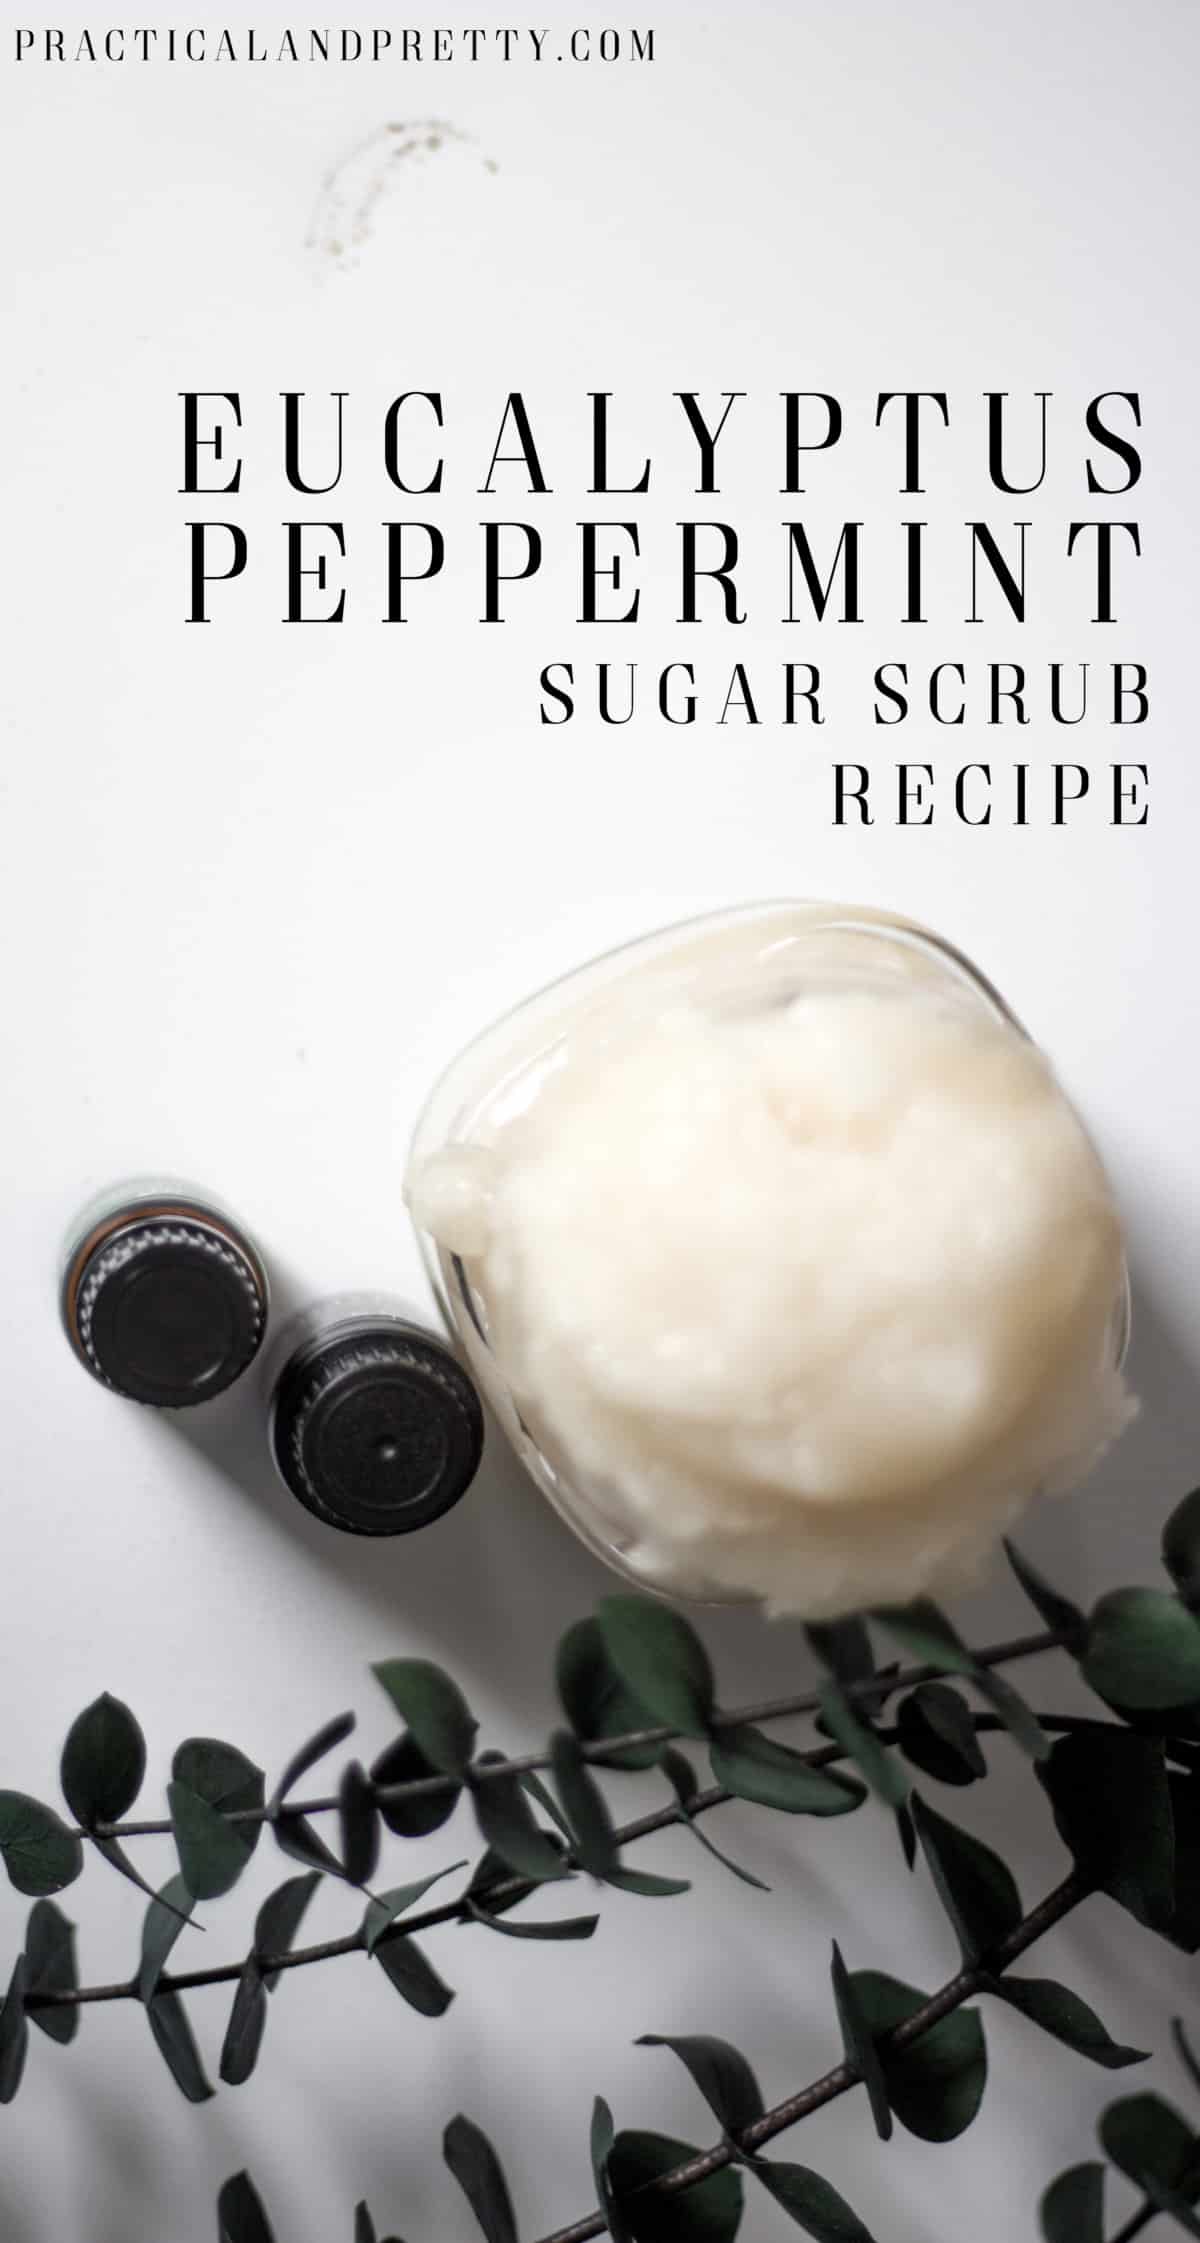 This peppermint eucalyptus sugar scrub is the perfect blend of scent and sugar to soften your skin. I use it for EVERYTHINg but especially love it to soften my lips!